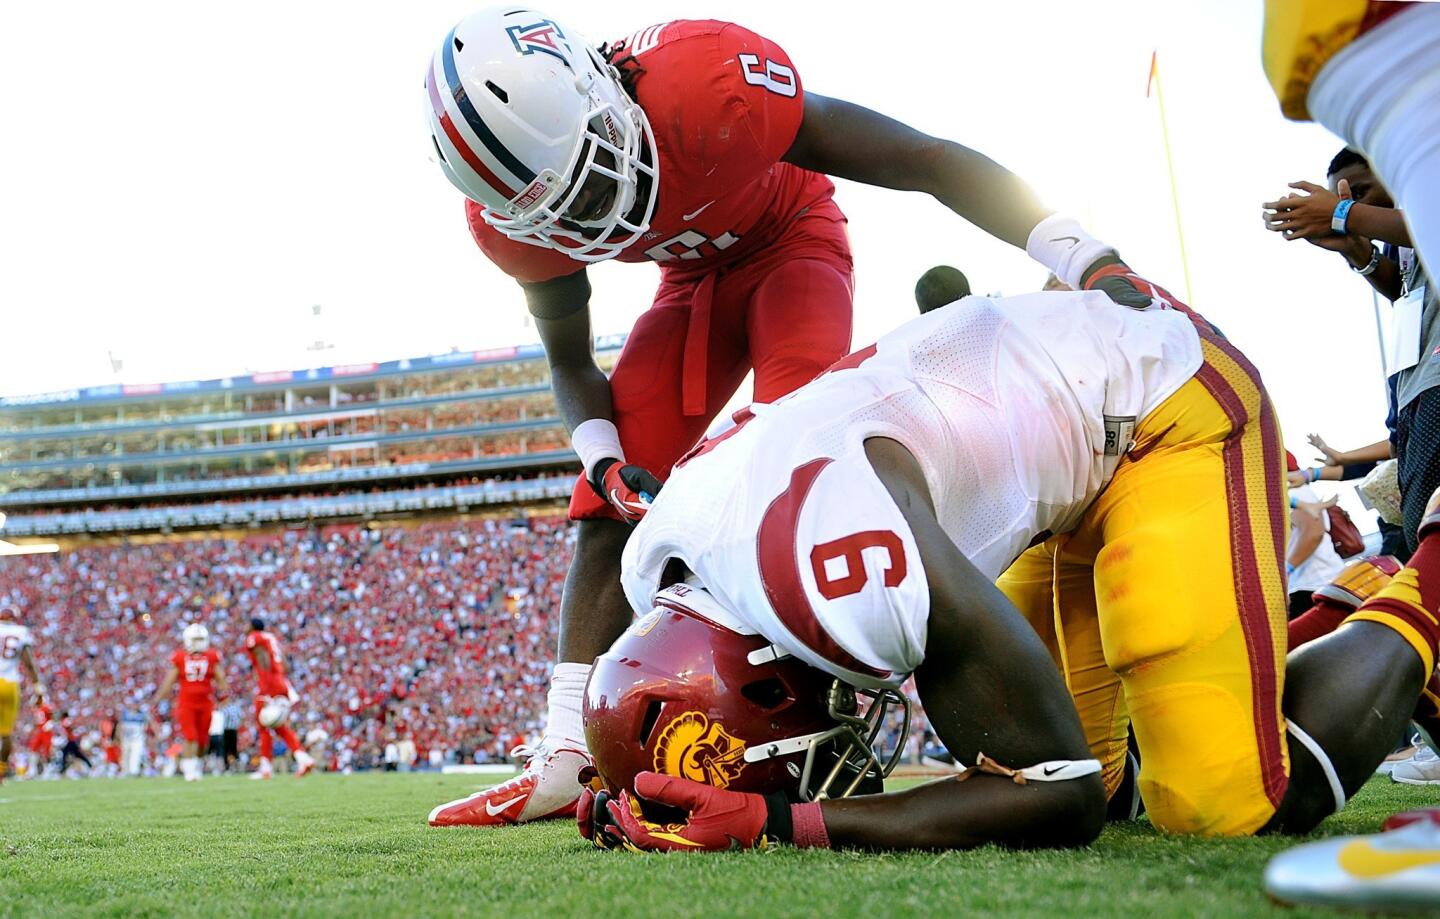 Trojans receiver Marqise Lee (9) is consoled by Wildcats cornerback Jonathan McKnight after a Hail Mary pass by USC fell incomplete to give the victory to Arizona, 39-36, on Saturday.